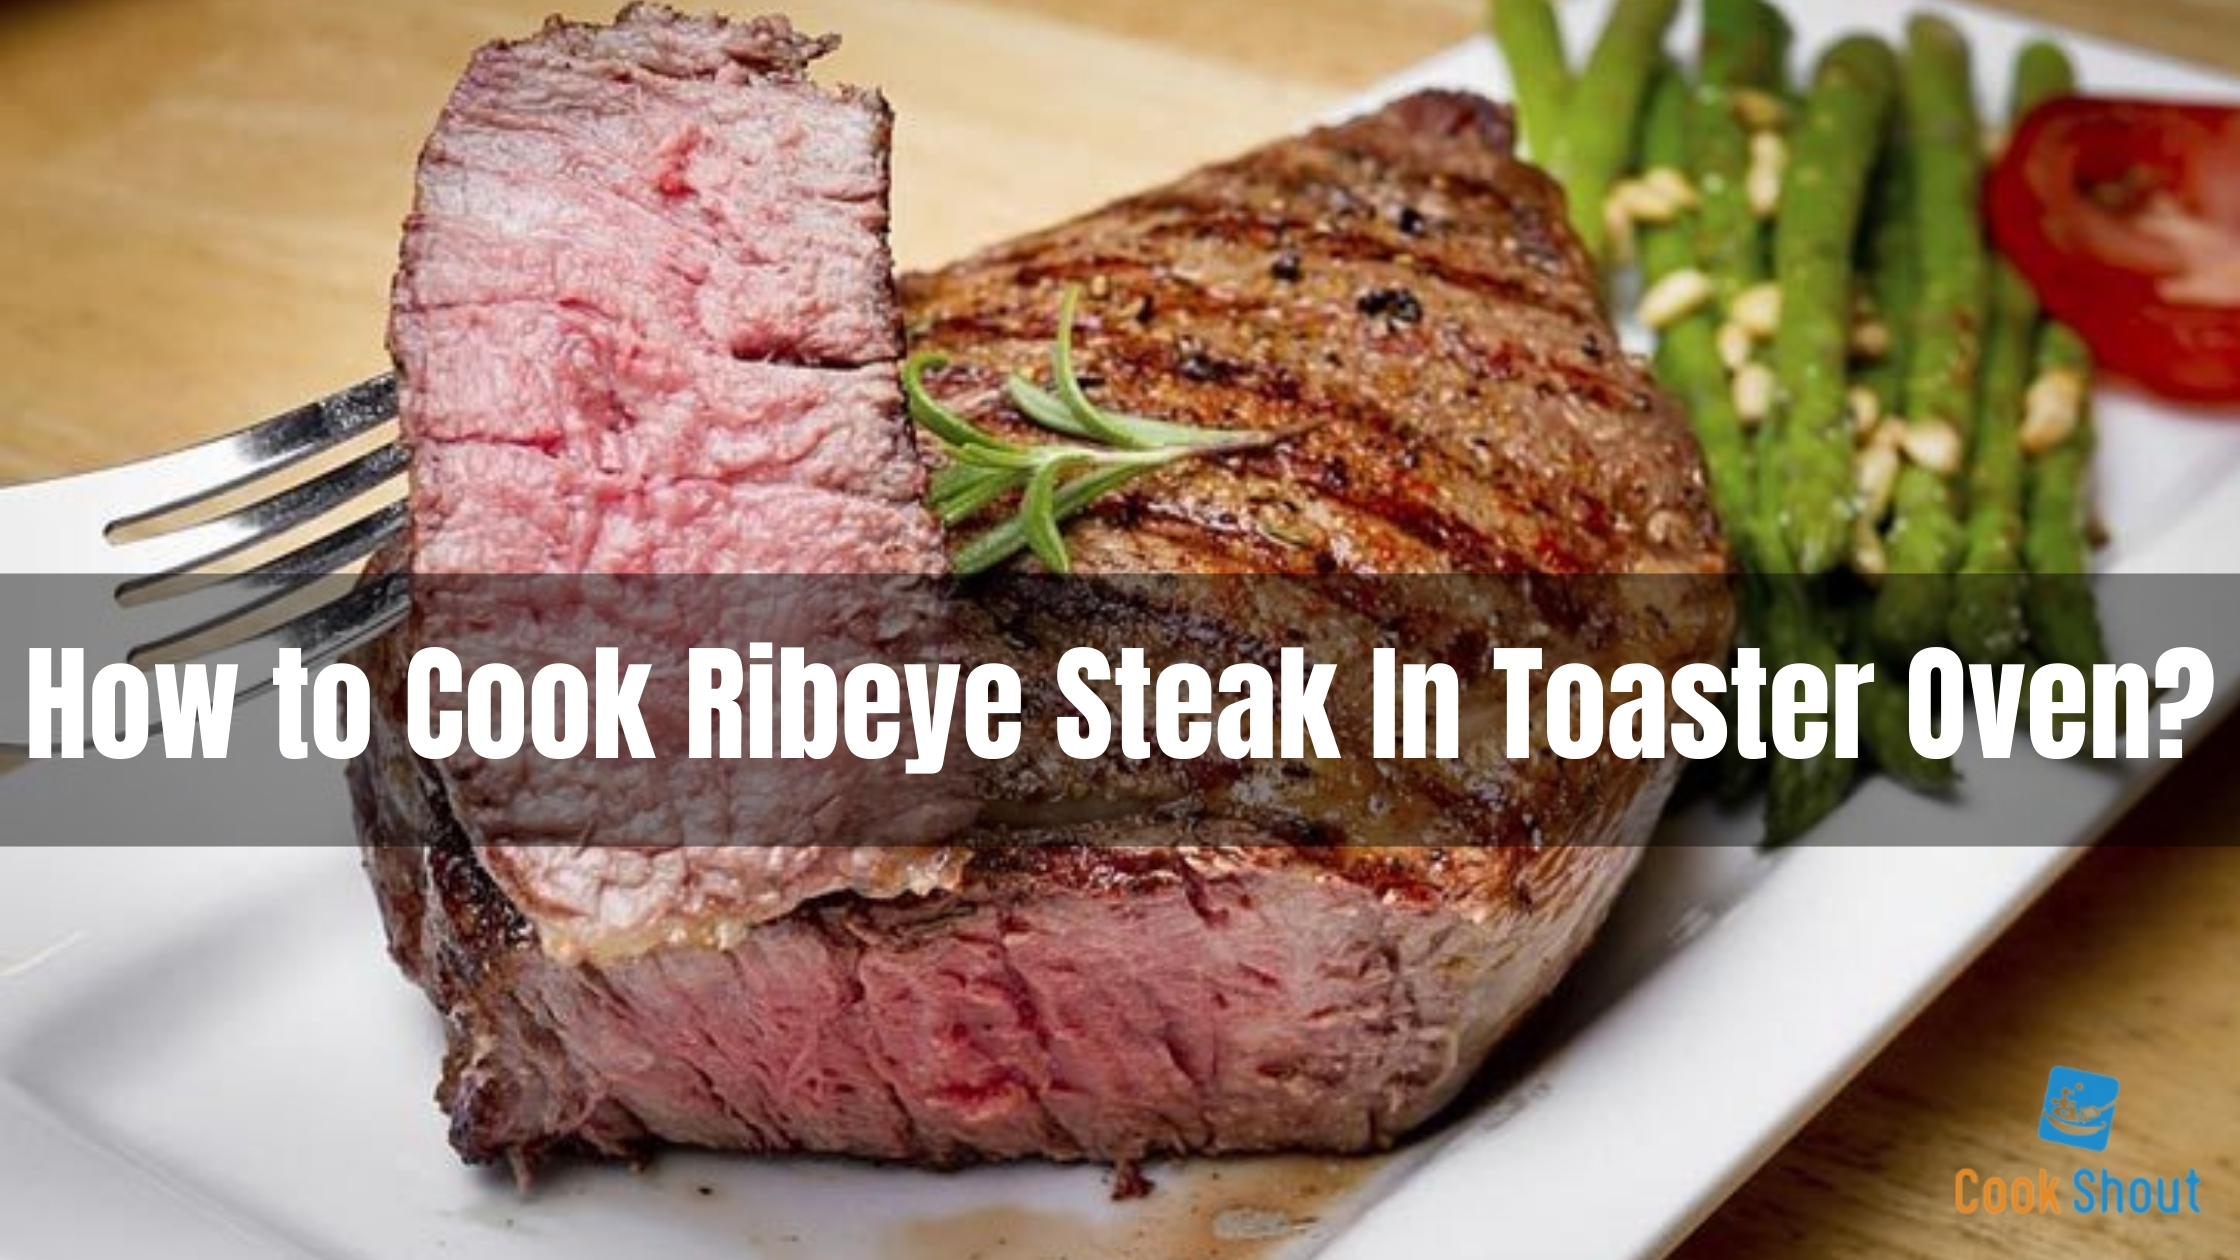 How to Cook Ribeye Steak In Toaster Oven